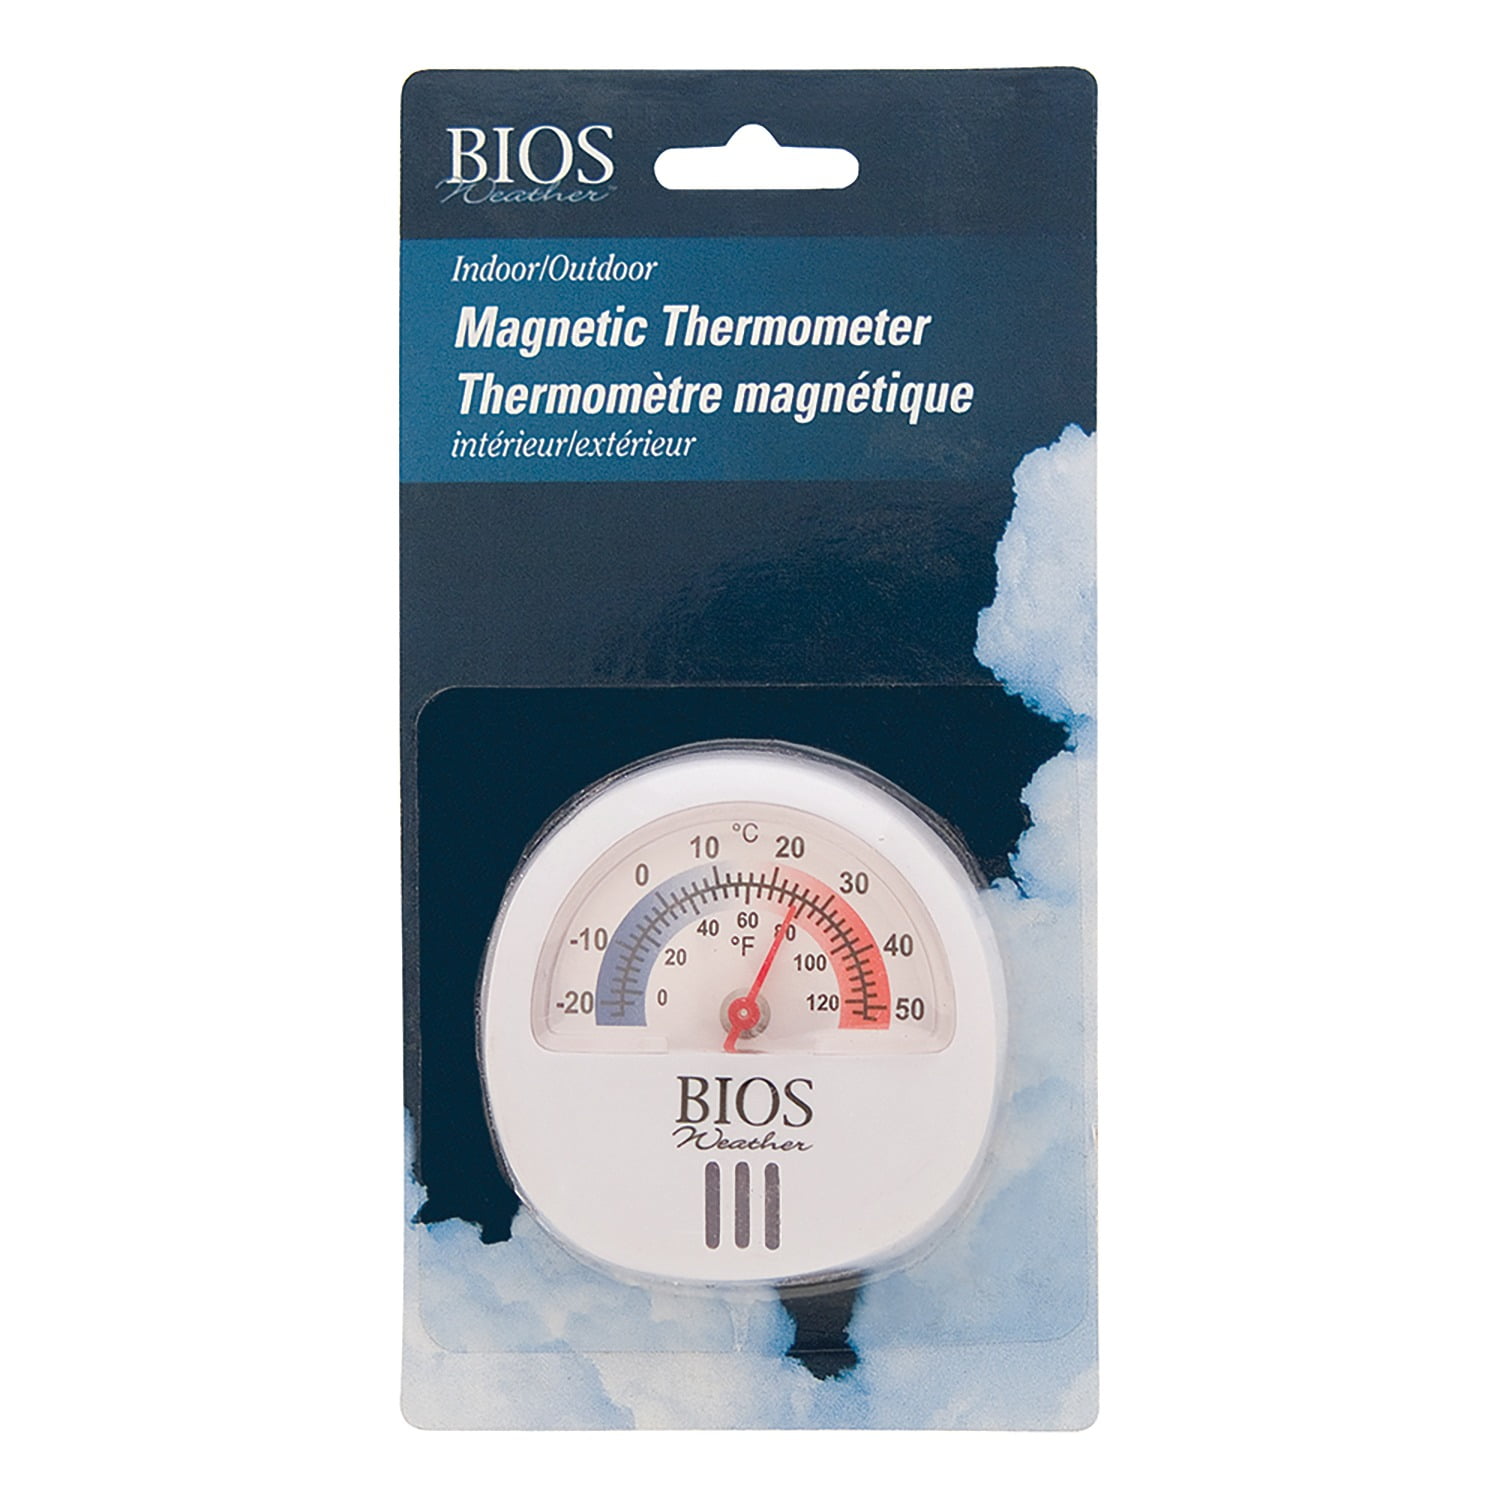 Thermometer with NY sign - #3621 2 pcs Magnet 